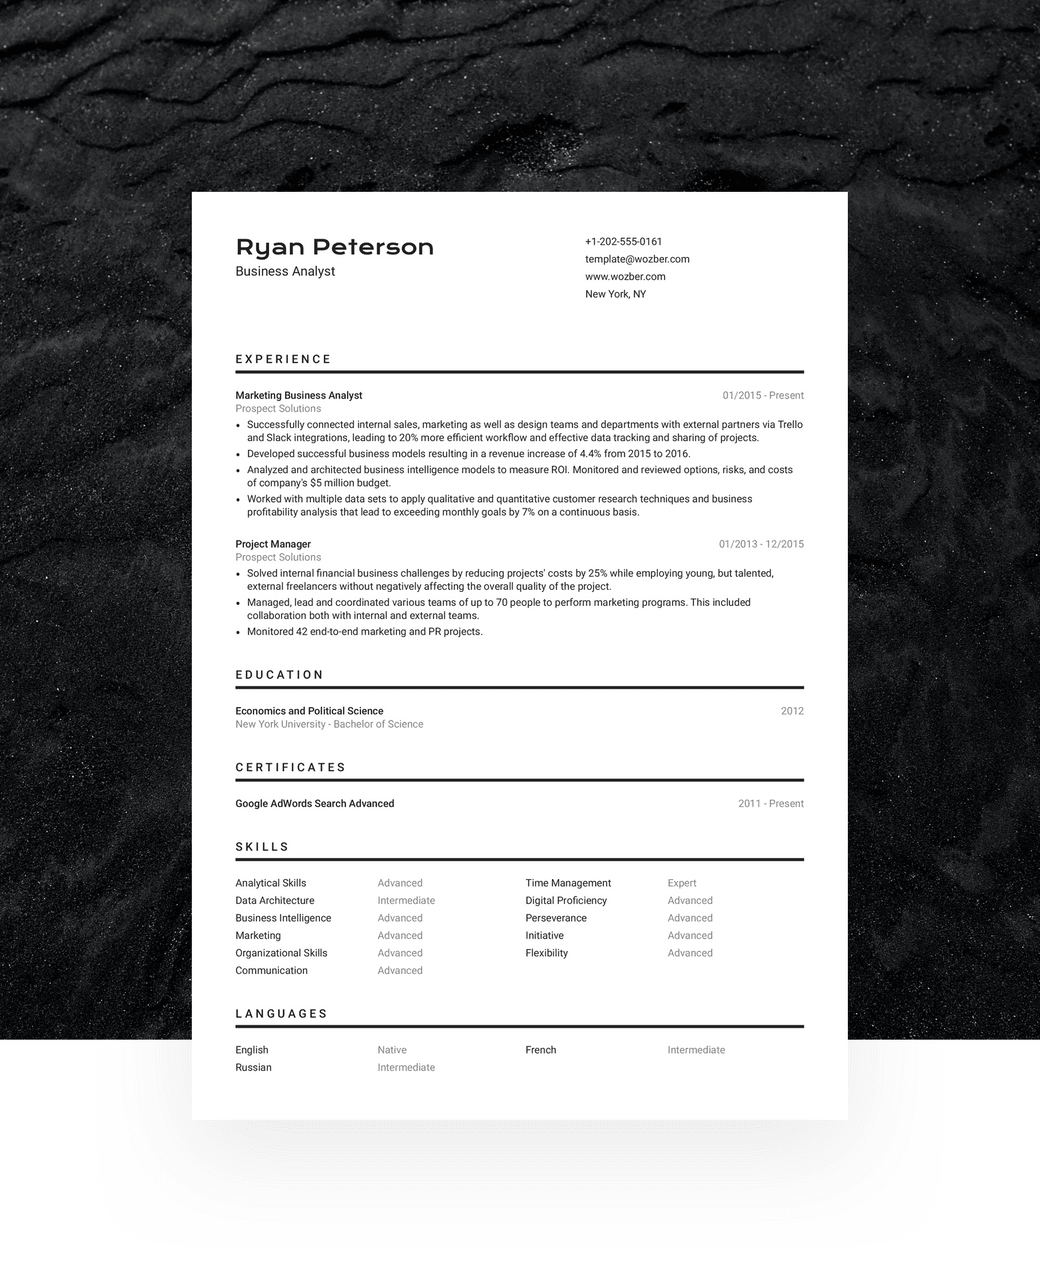 A modern, ATS-friendly CV template for job seekers who want to look sharp and confident.